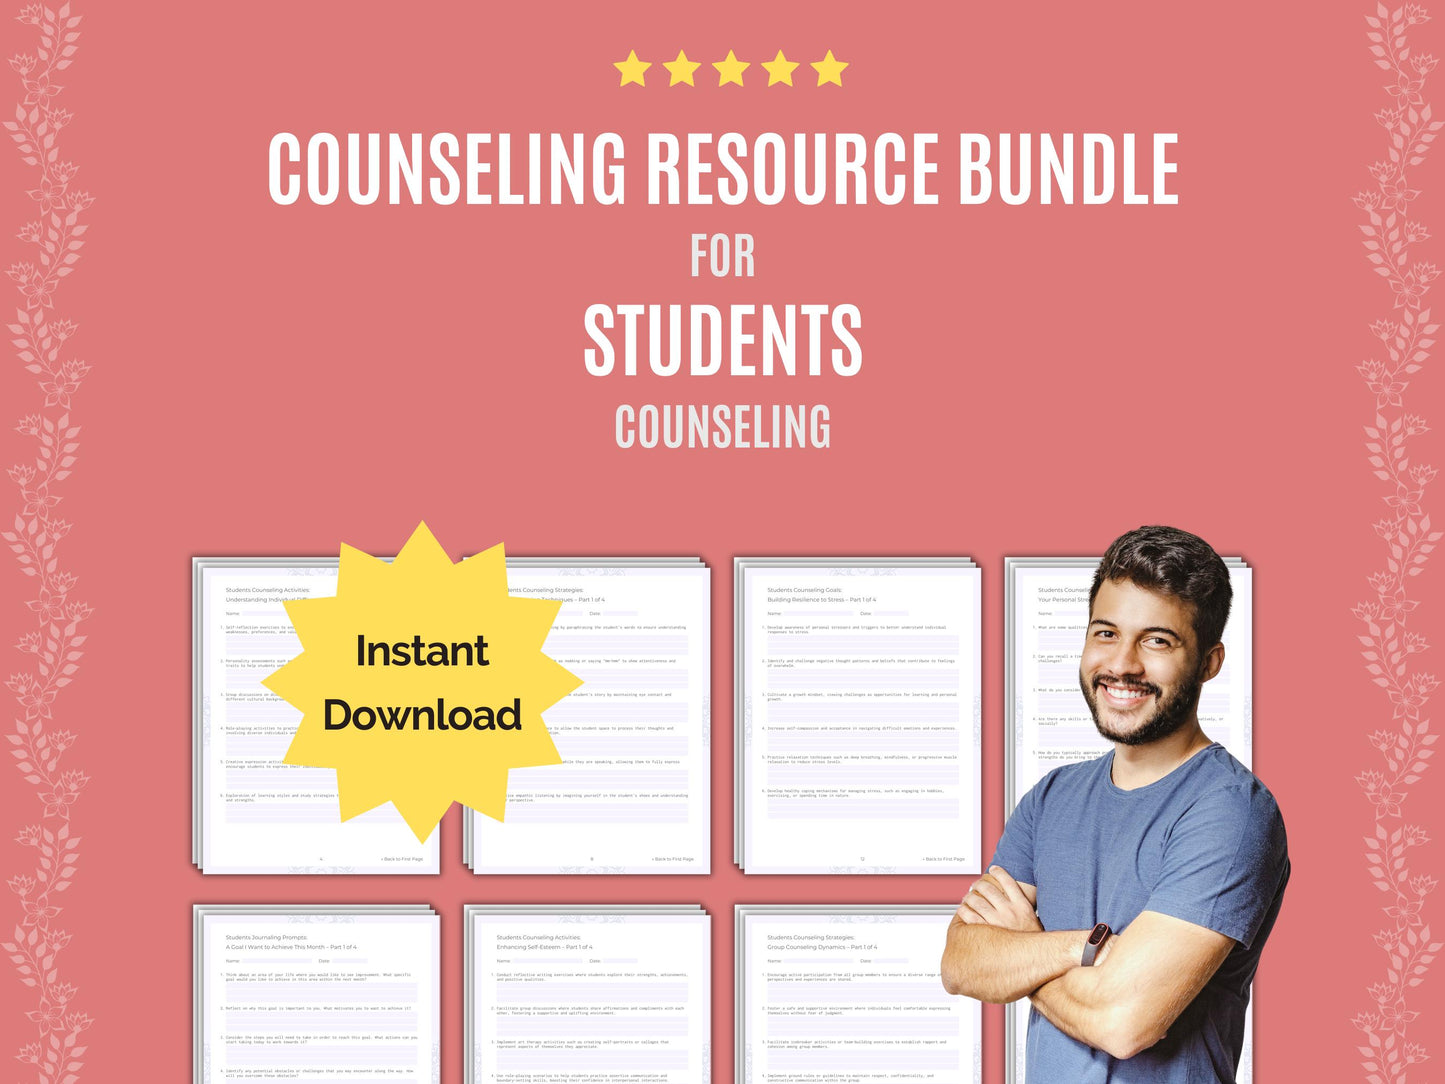 Mental Health, Students Counseling, Therapist, Students Template, Students Content, Counselor, Students Workbook, Students Idea, Students Resource, Students Tool, Students Bundle, Students Therapy, Students Worksheet